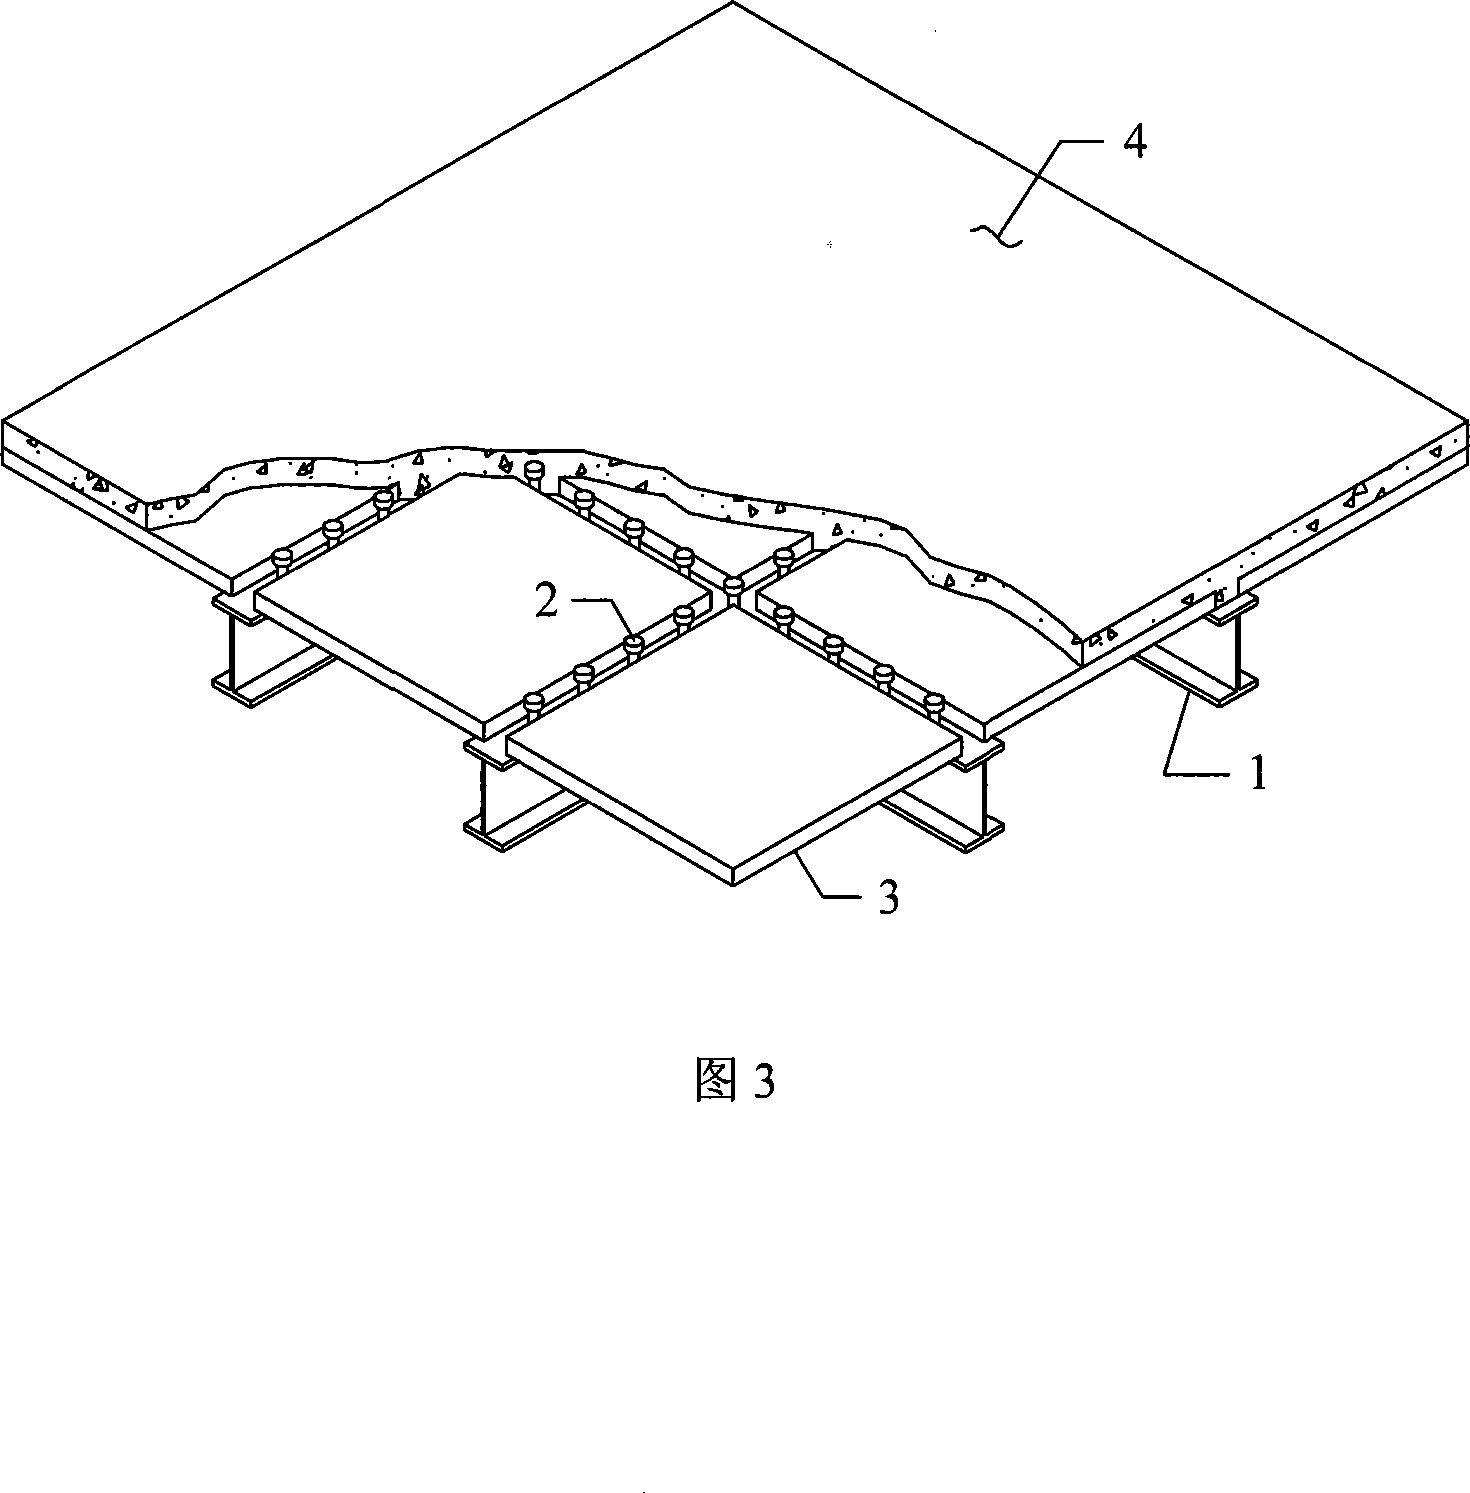 Bidirectional steel-stacked plate concrete composite building roof